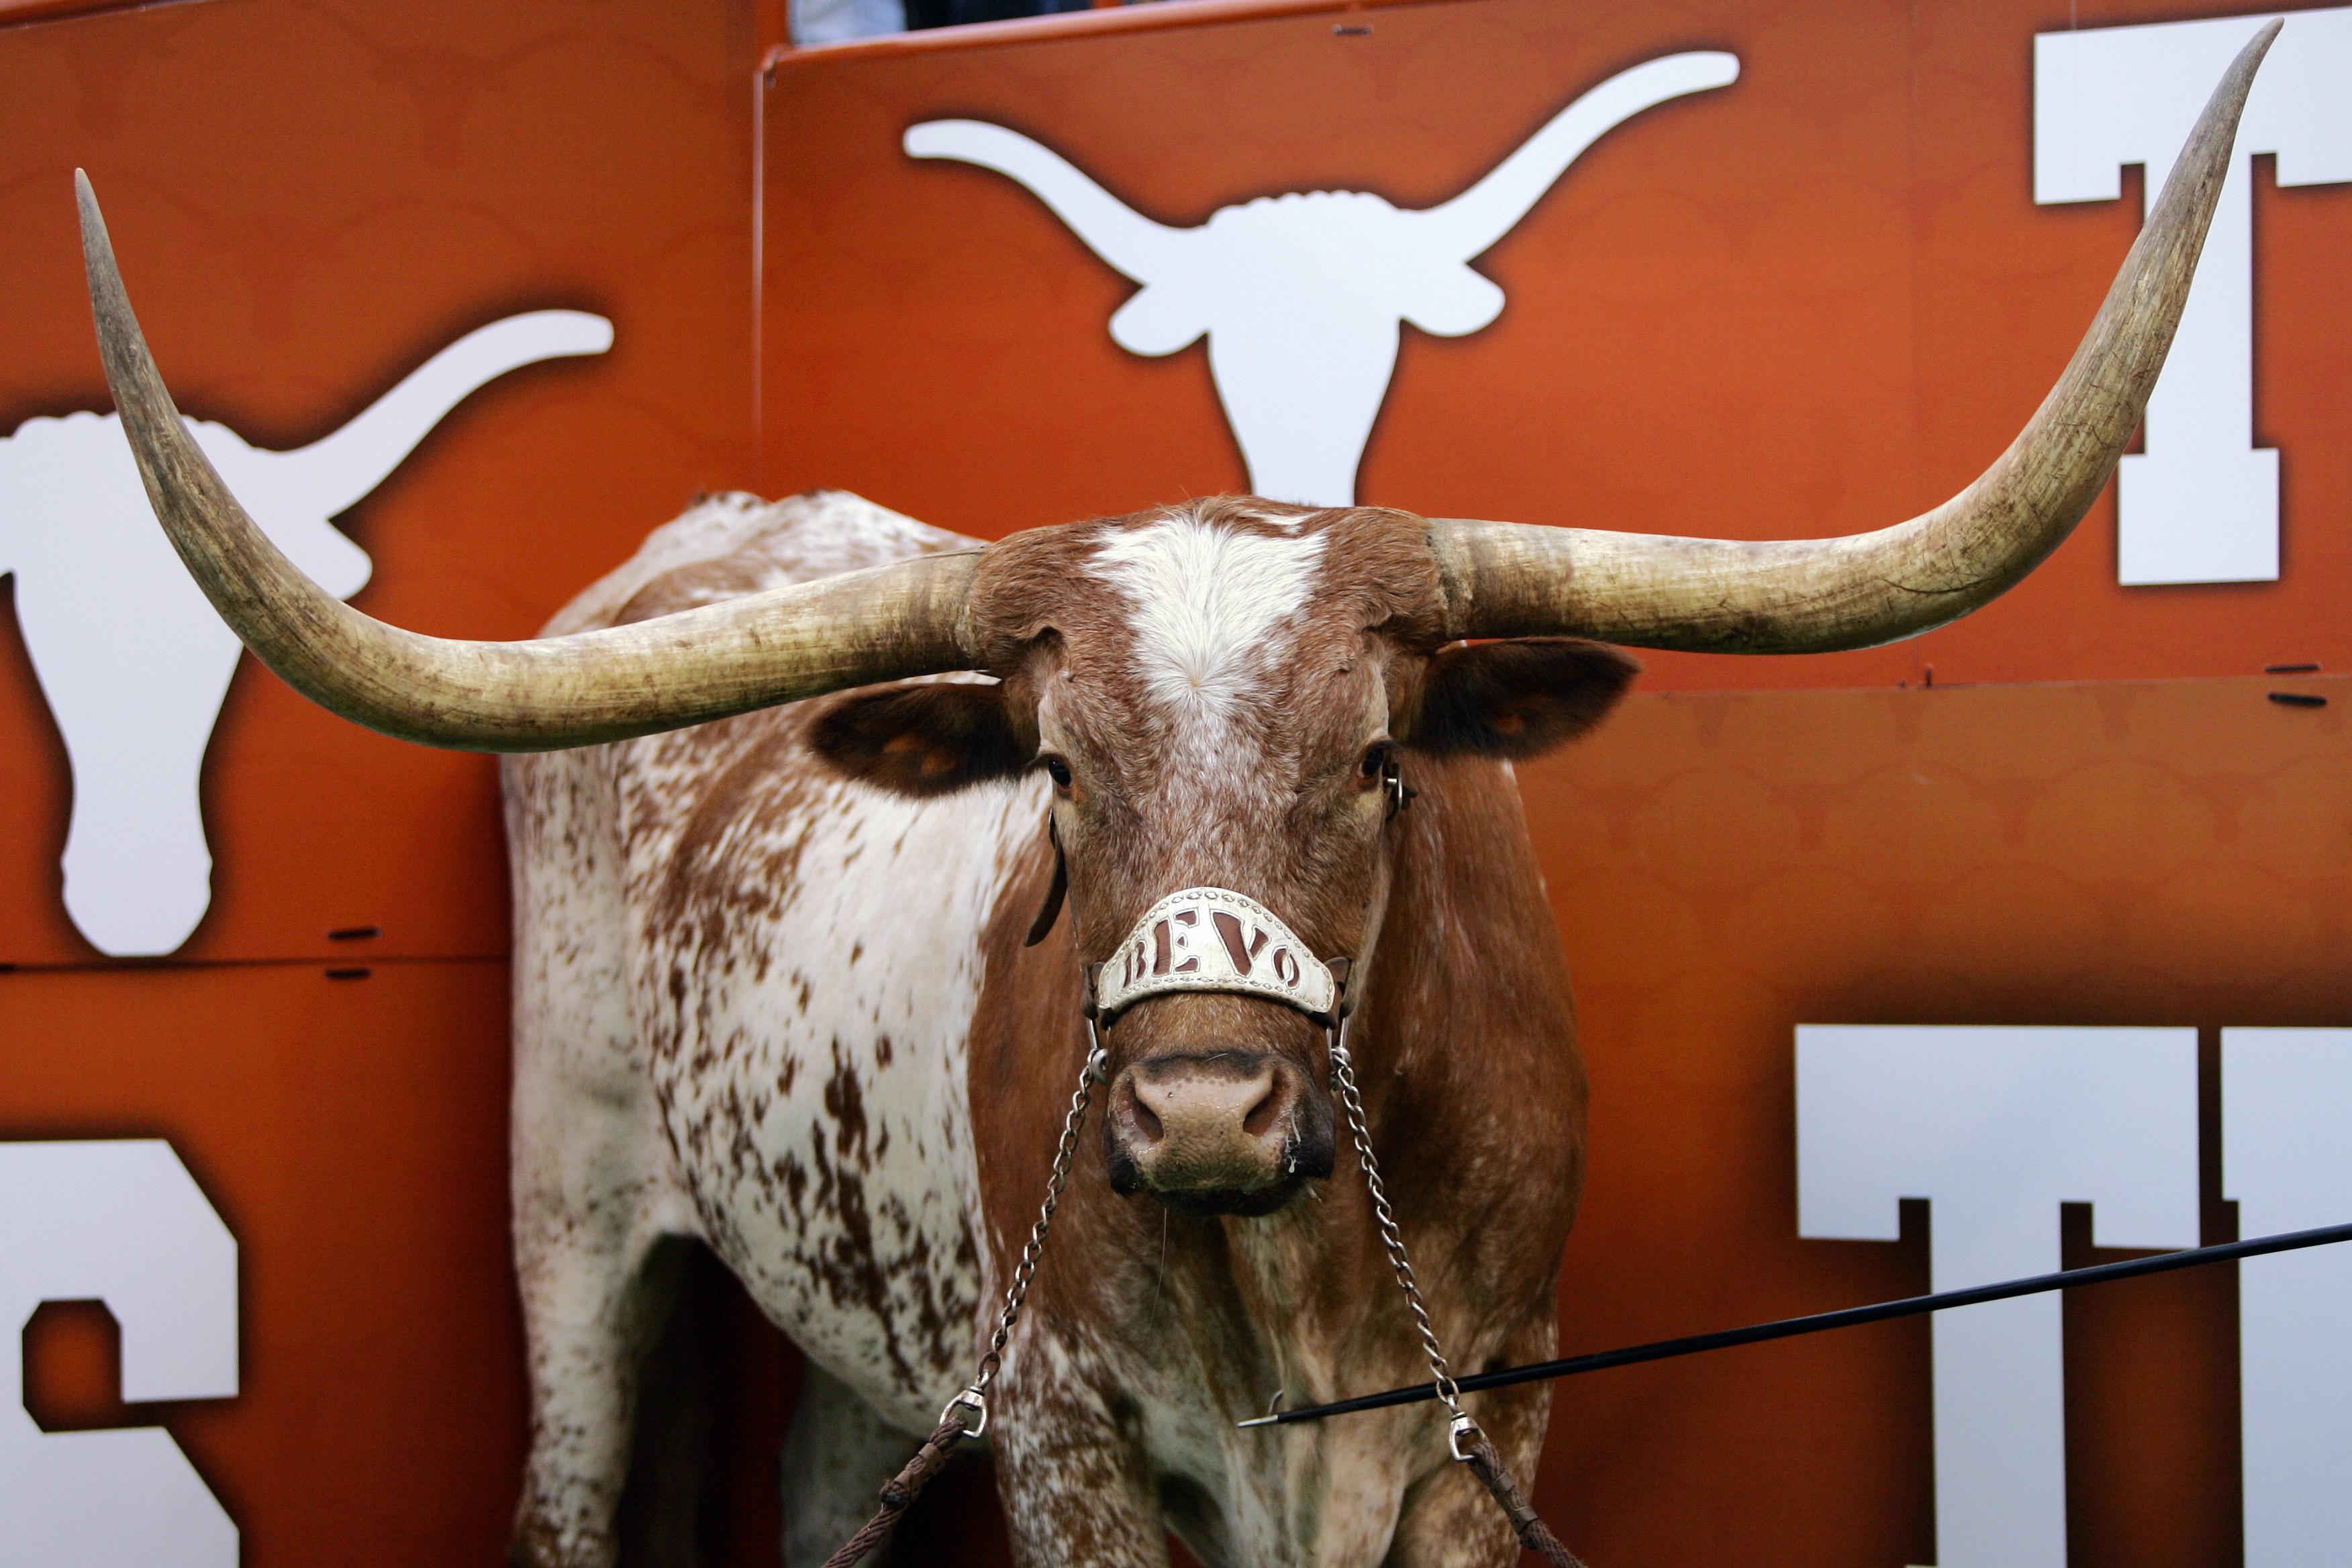 AUSTIN, TX - OCTOBER 10:  Bevo, the mascot of the Texas Longhorns, stands in his corner during a game against the Colorado Buffaloes on October 10, 2009 at Darrell K Royal-Texas Memorial Stadium in Austin, Texas.  Texas won 38-14.  (Photo by Brian Bahr/Ge